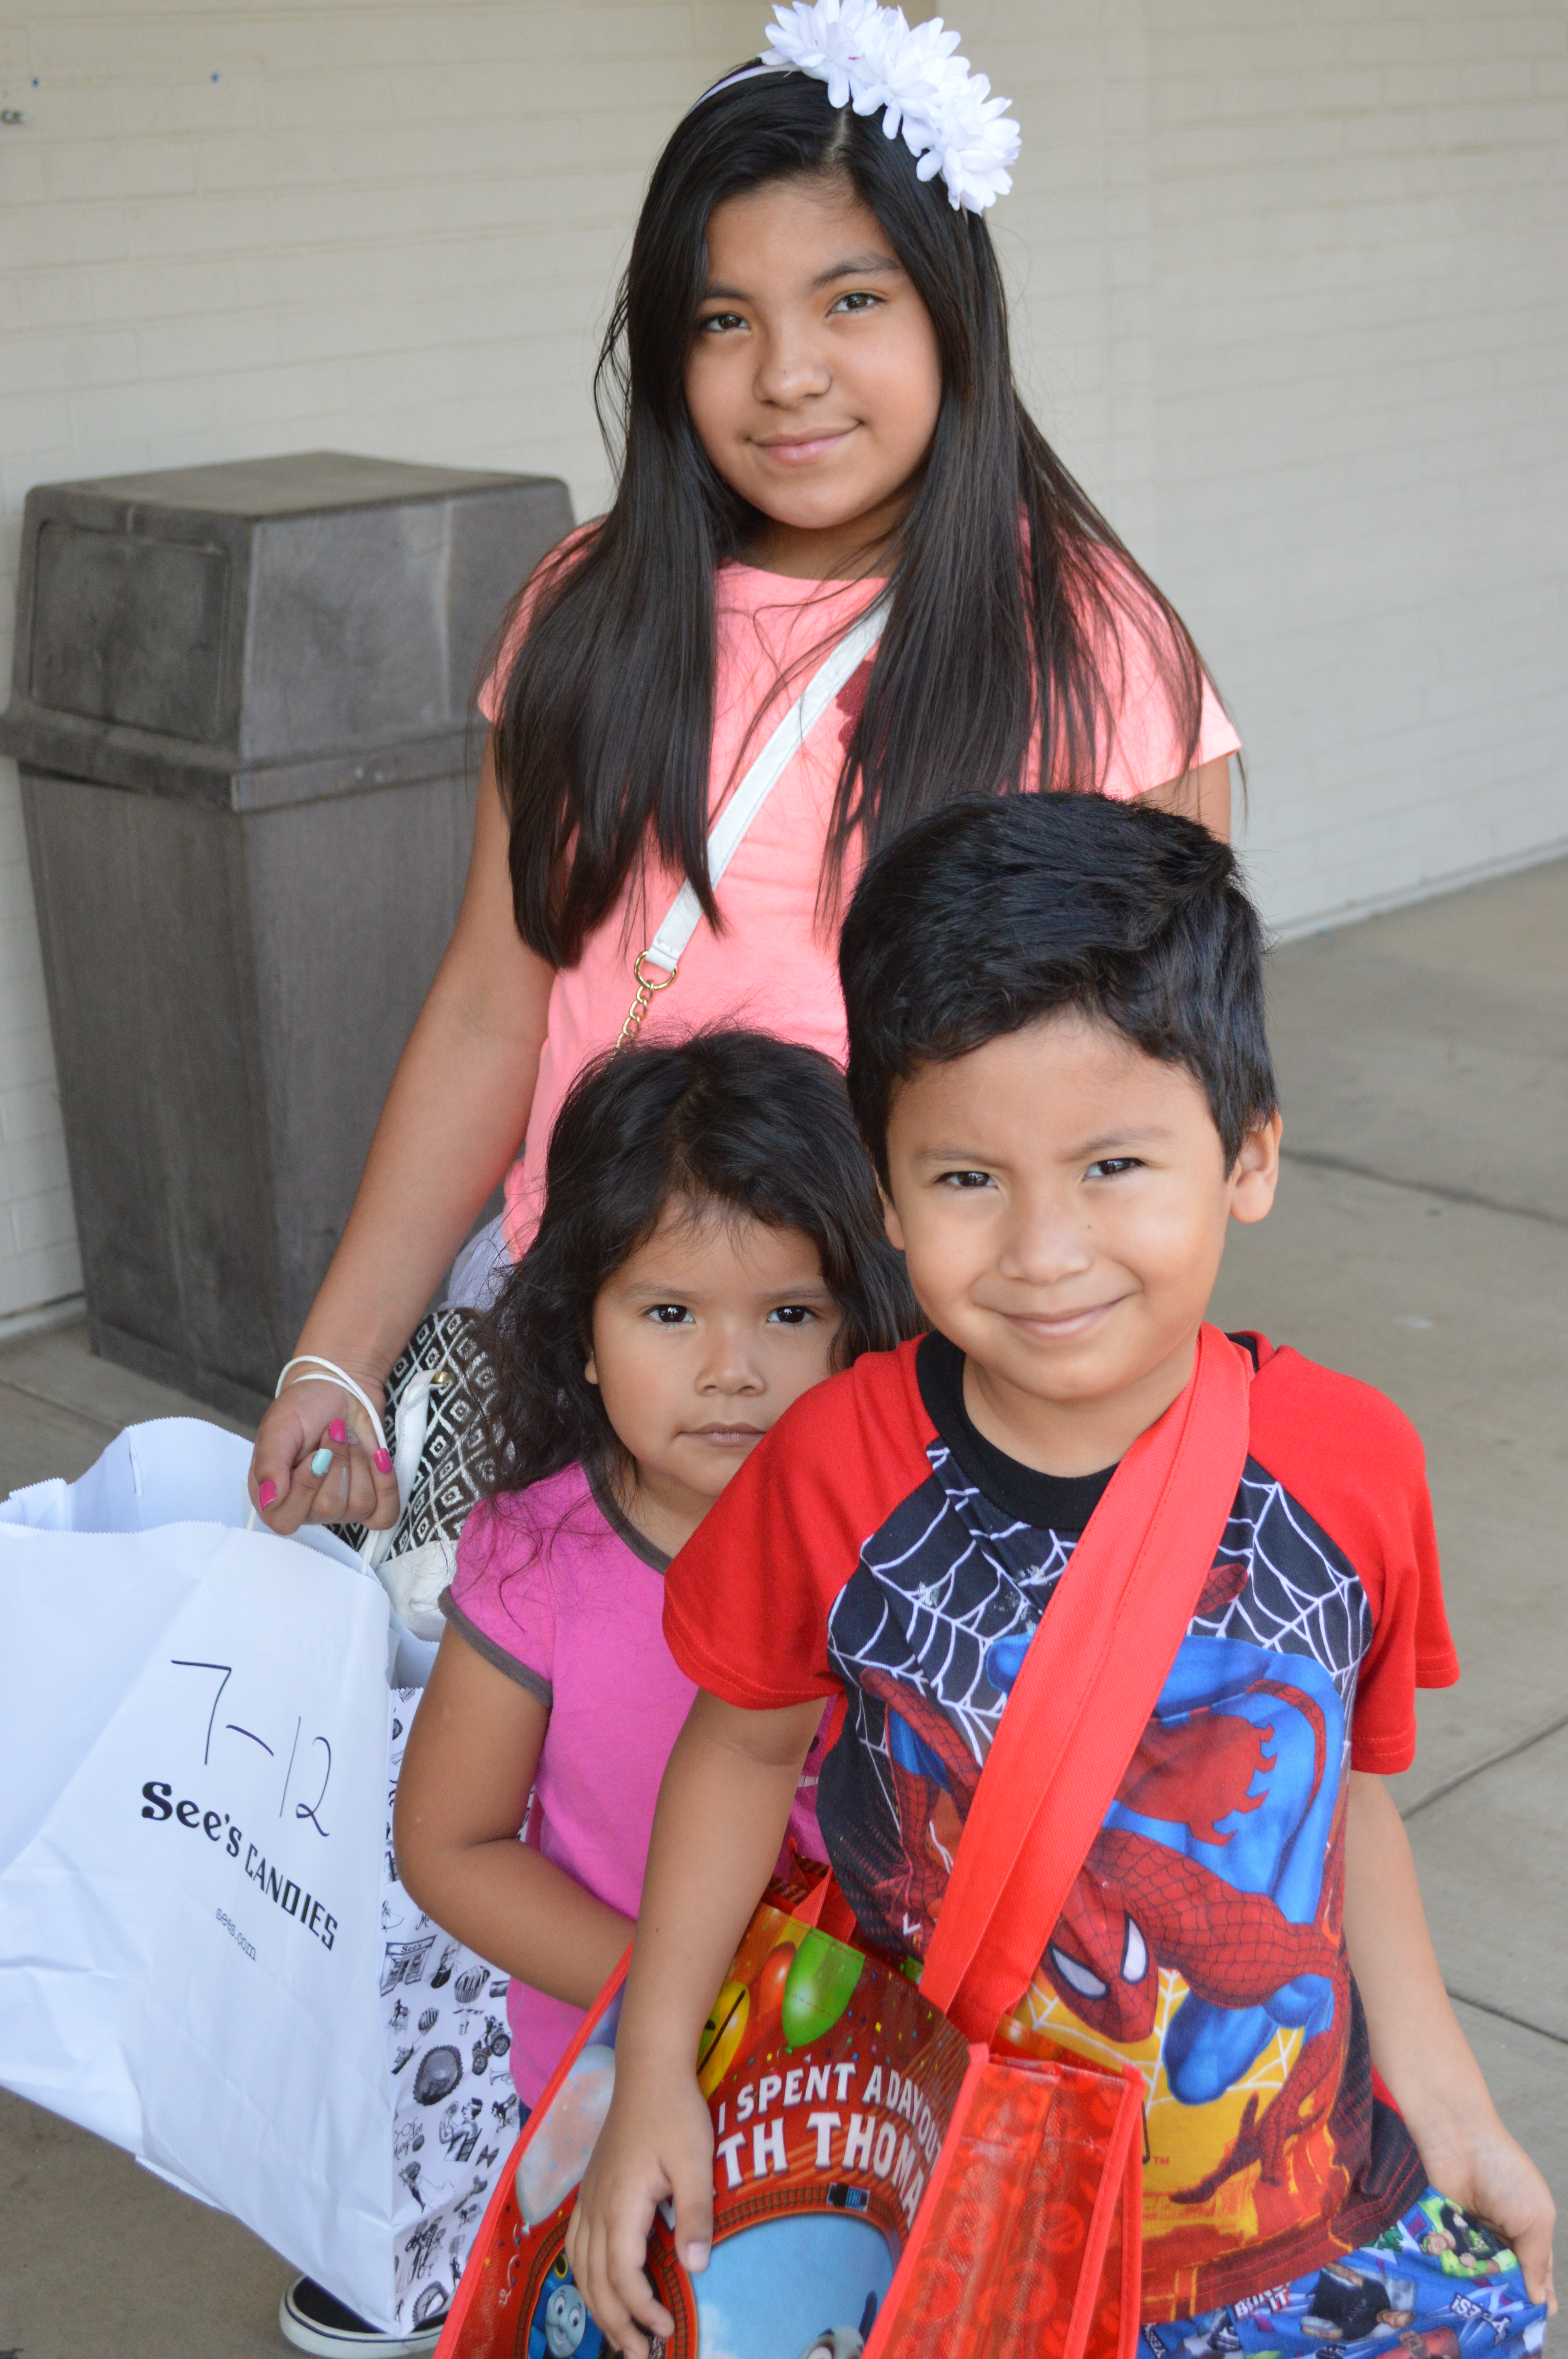 Children and youth receive school supplies as distribution begins